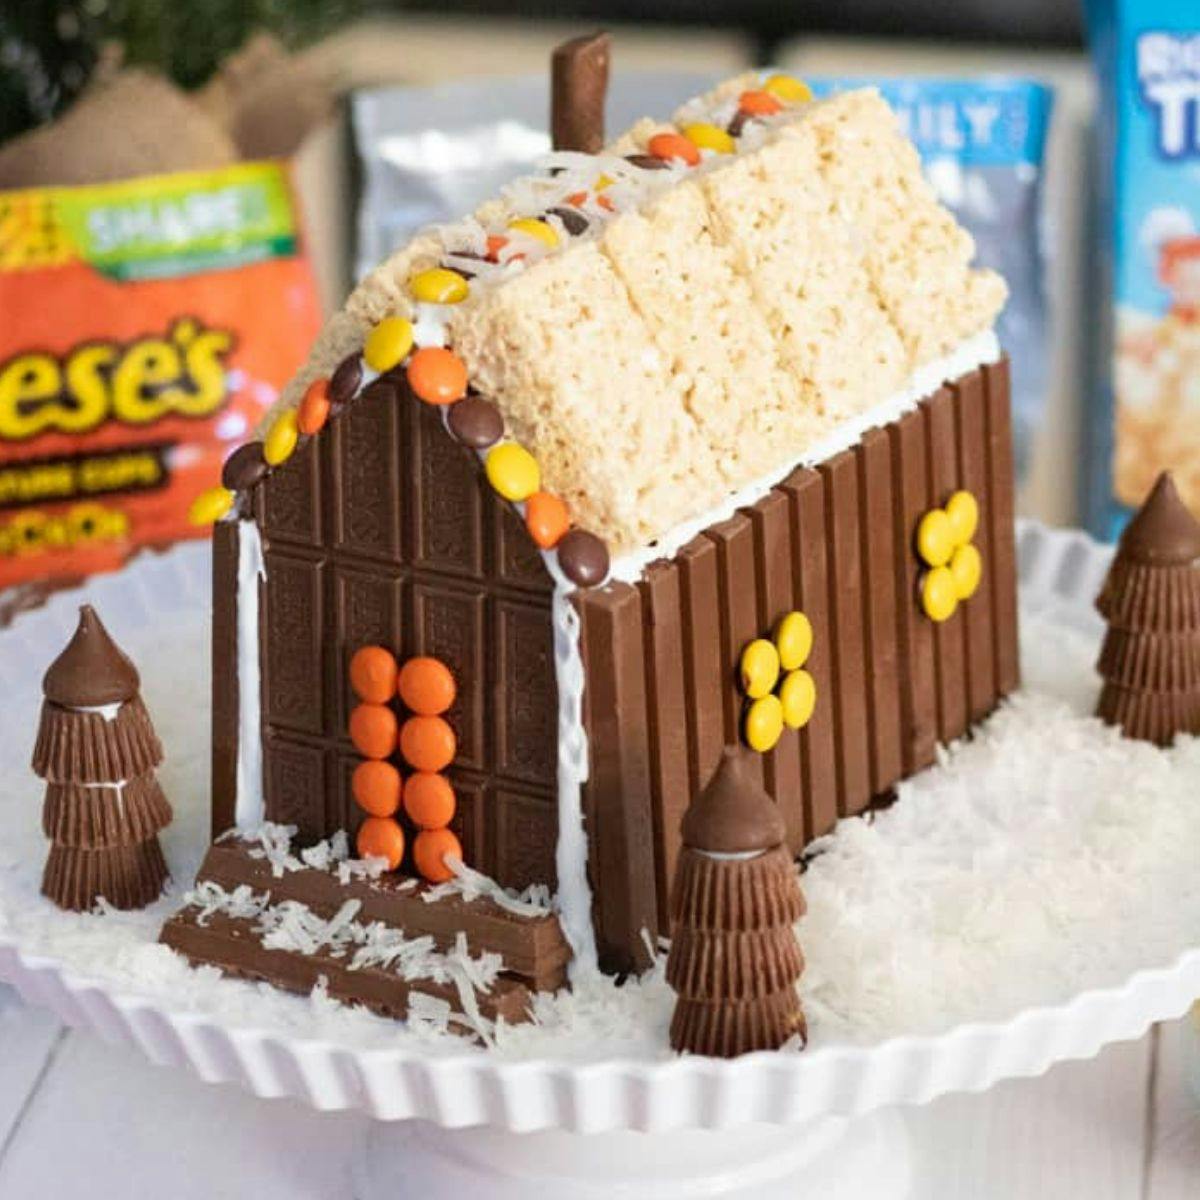 Cabin made out of chocolate and rice krispie treats.